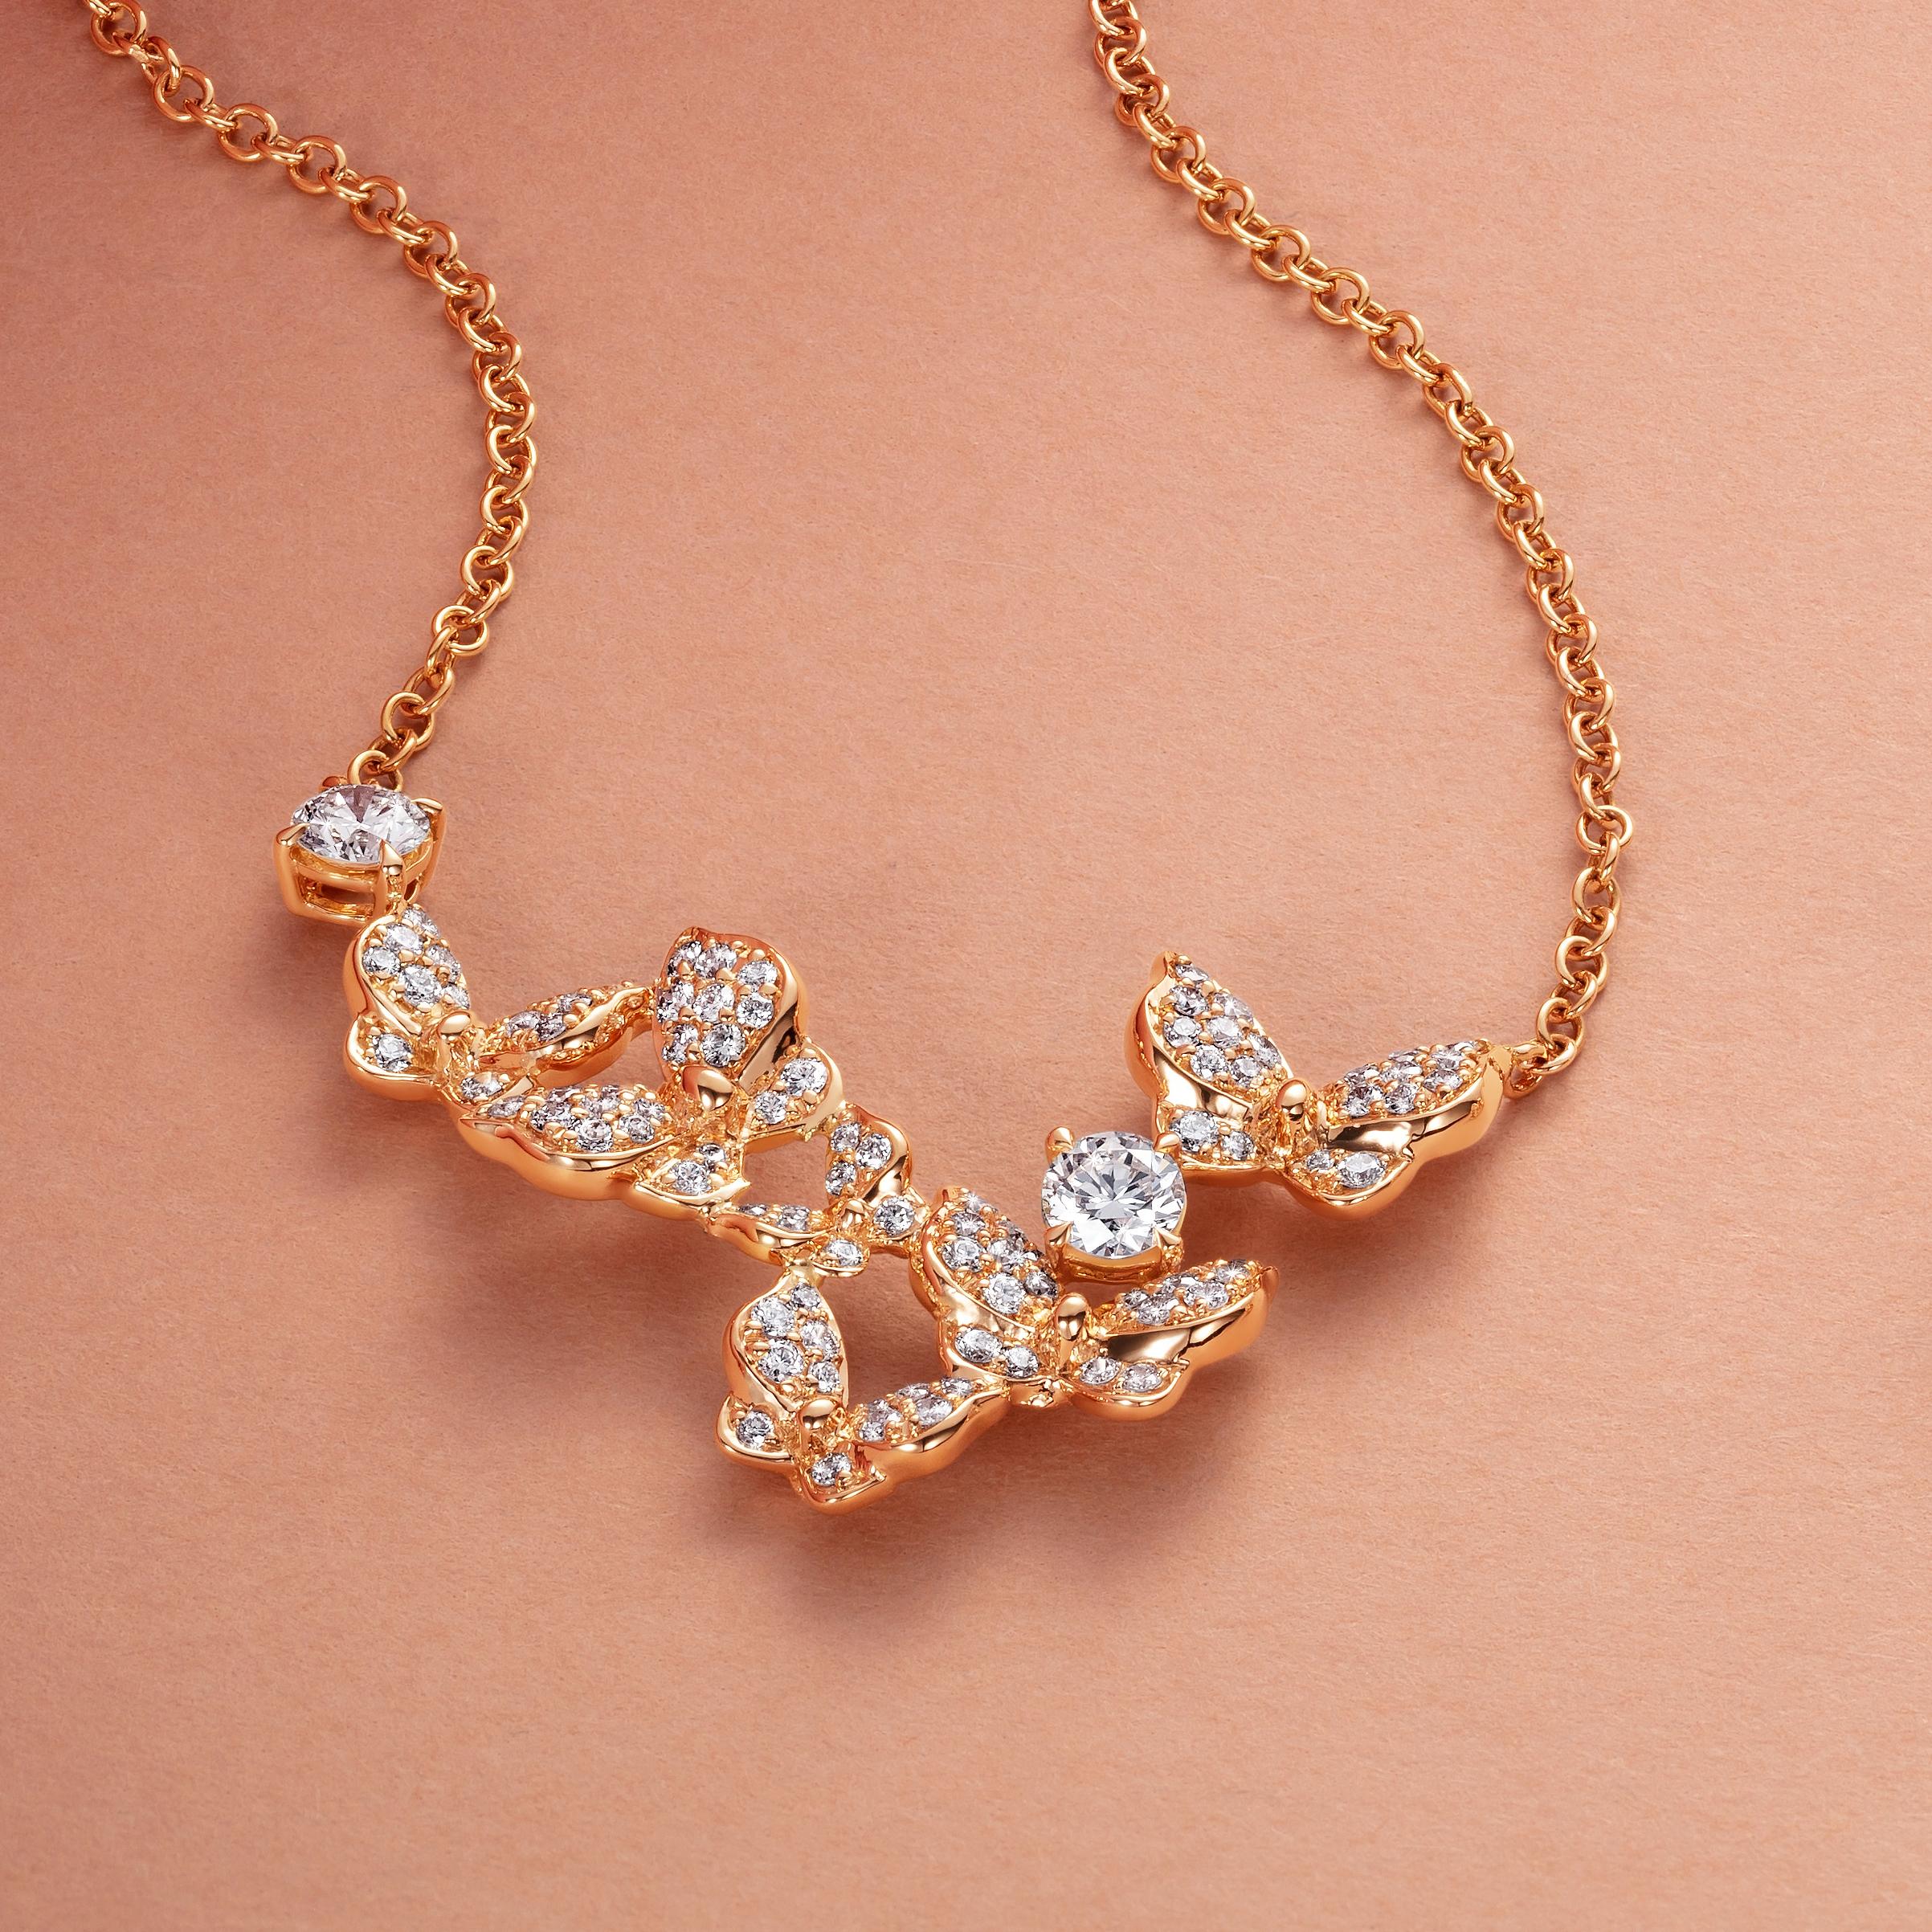 Necklace crafted in 18K Rose Gold
Round Brilliant Diamonds GVS + = 0.98 carats
Chain length = 42 cm

The video contains item ref LU638318201222 and LU638318201182.
However, this listing is for item LU638318201222 only.
If you would like to purchase